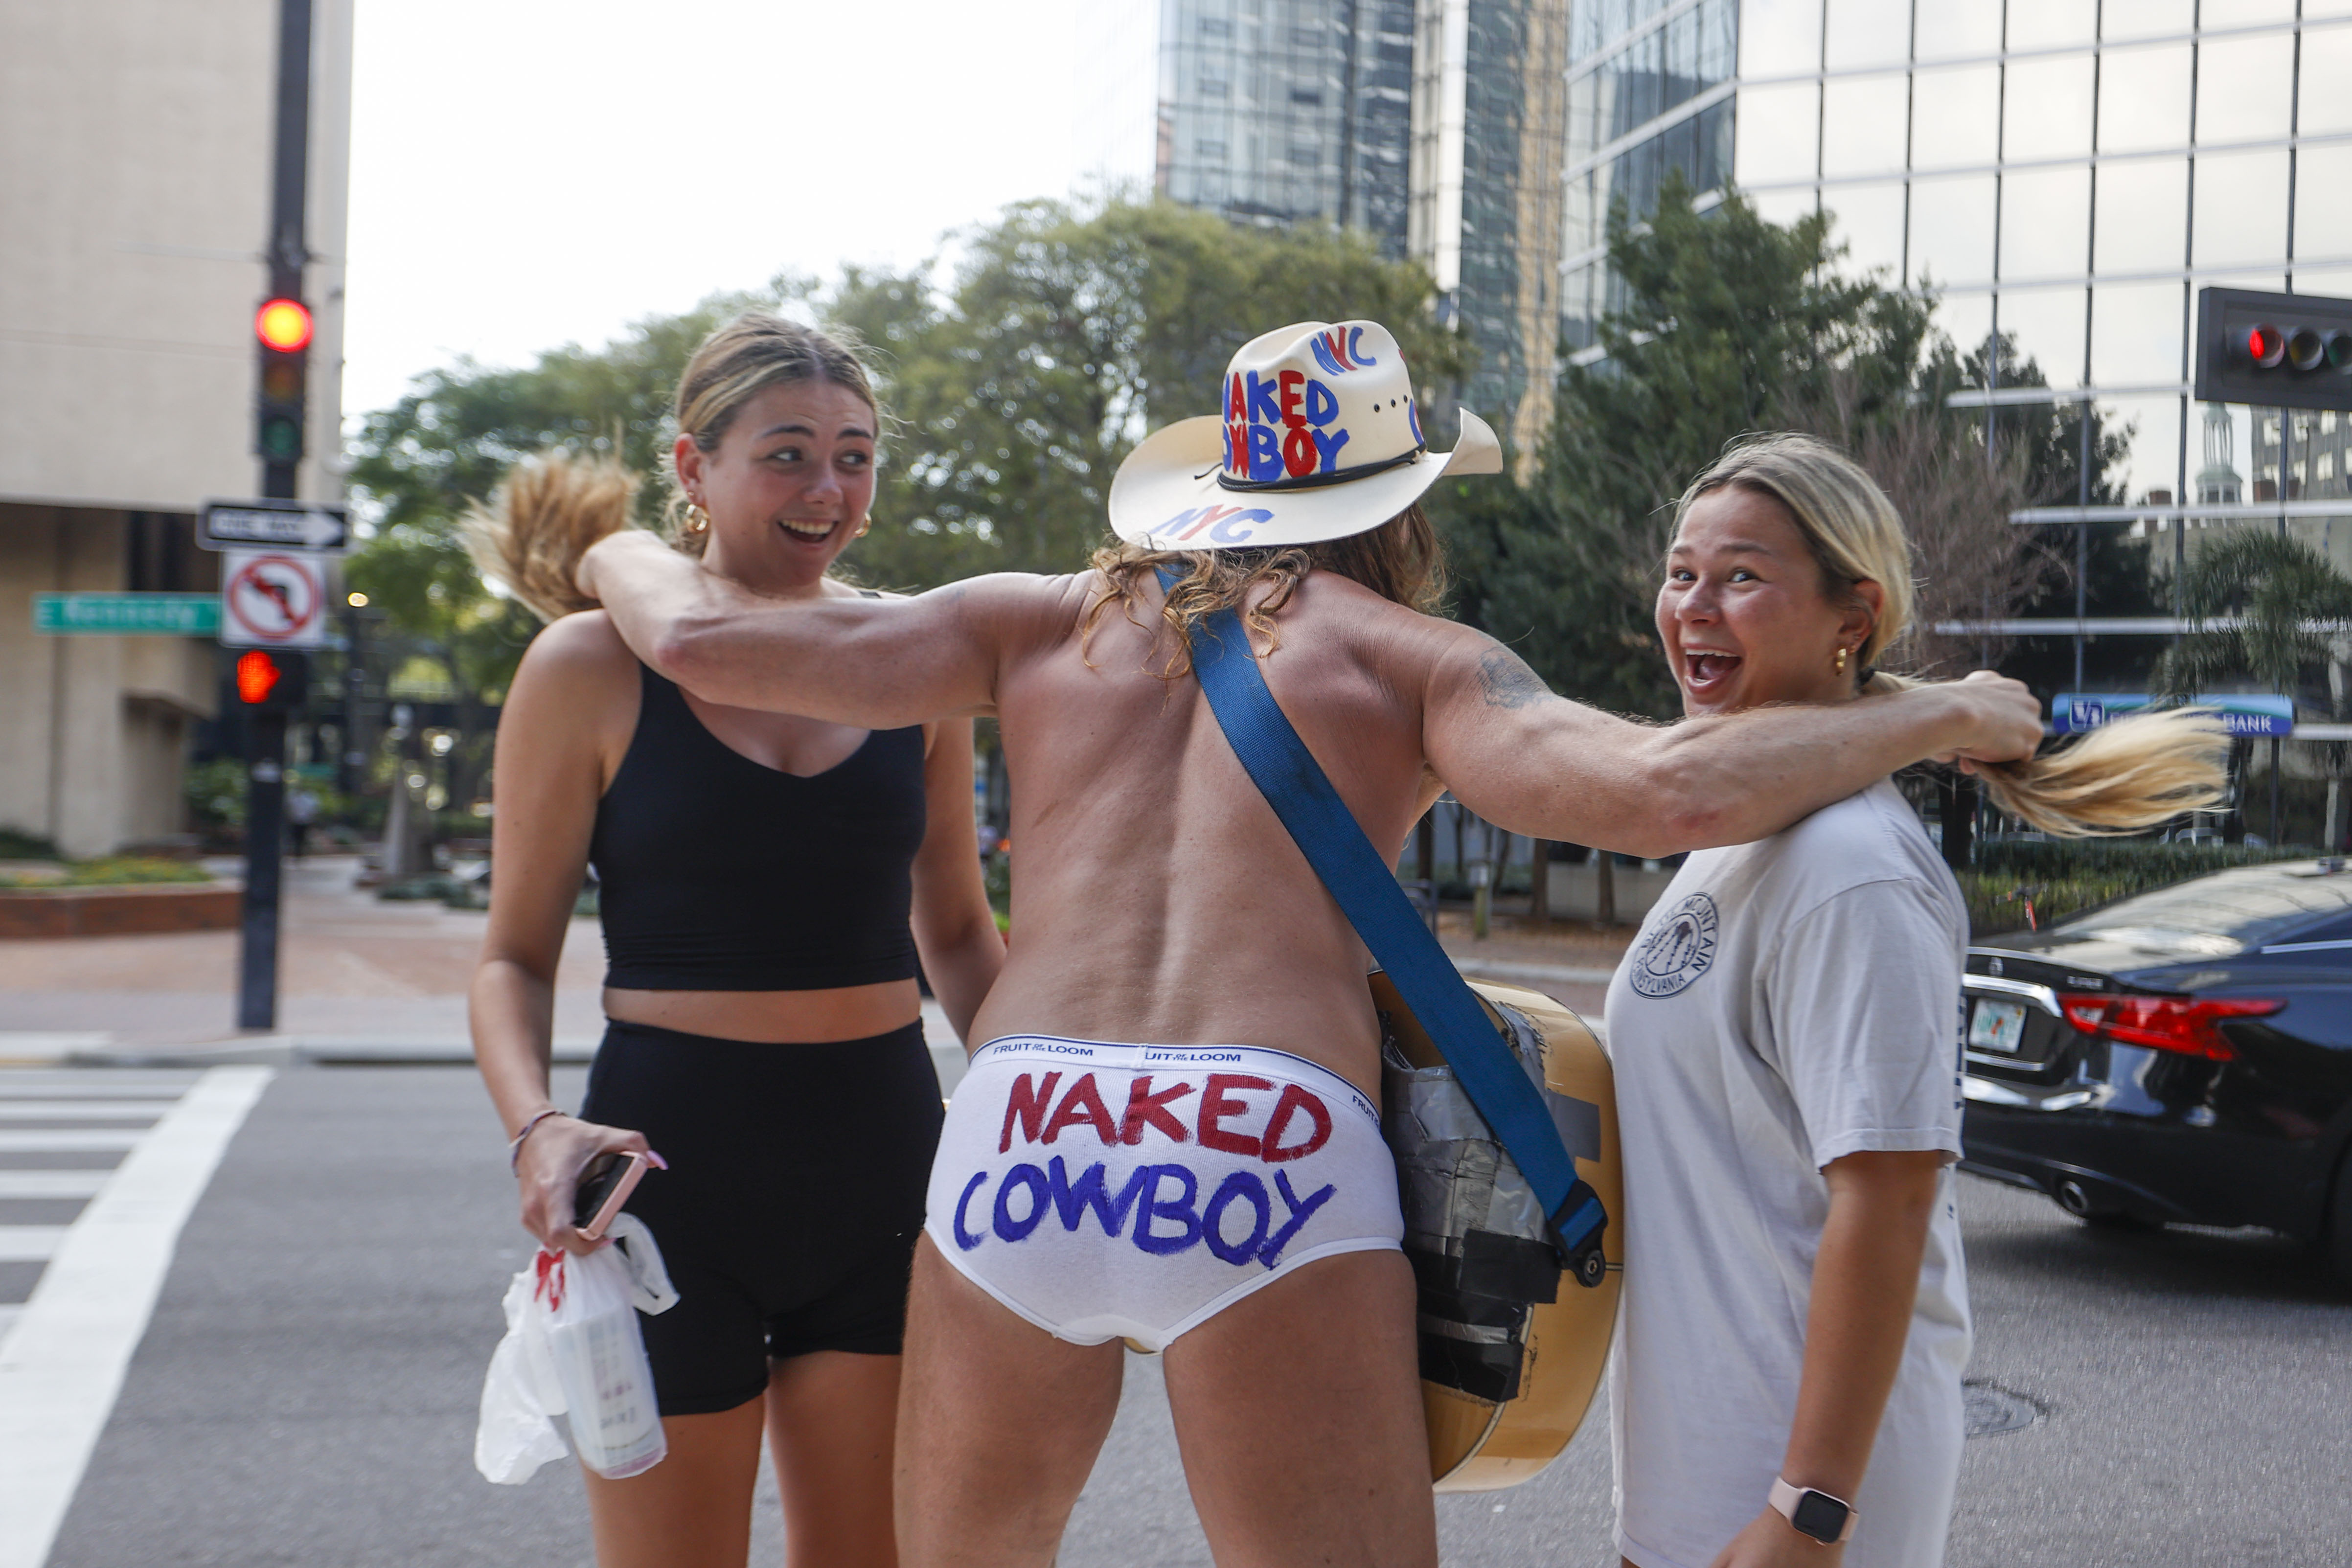 New York City's Naked Cowboy spotted in Tampa